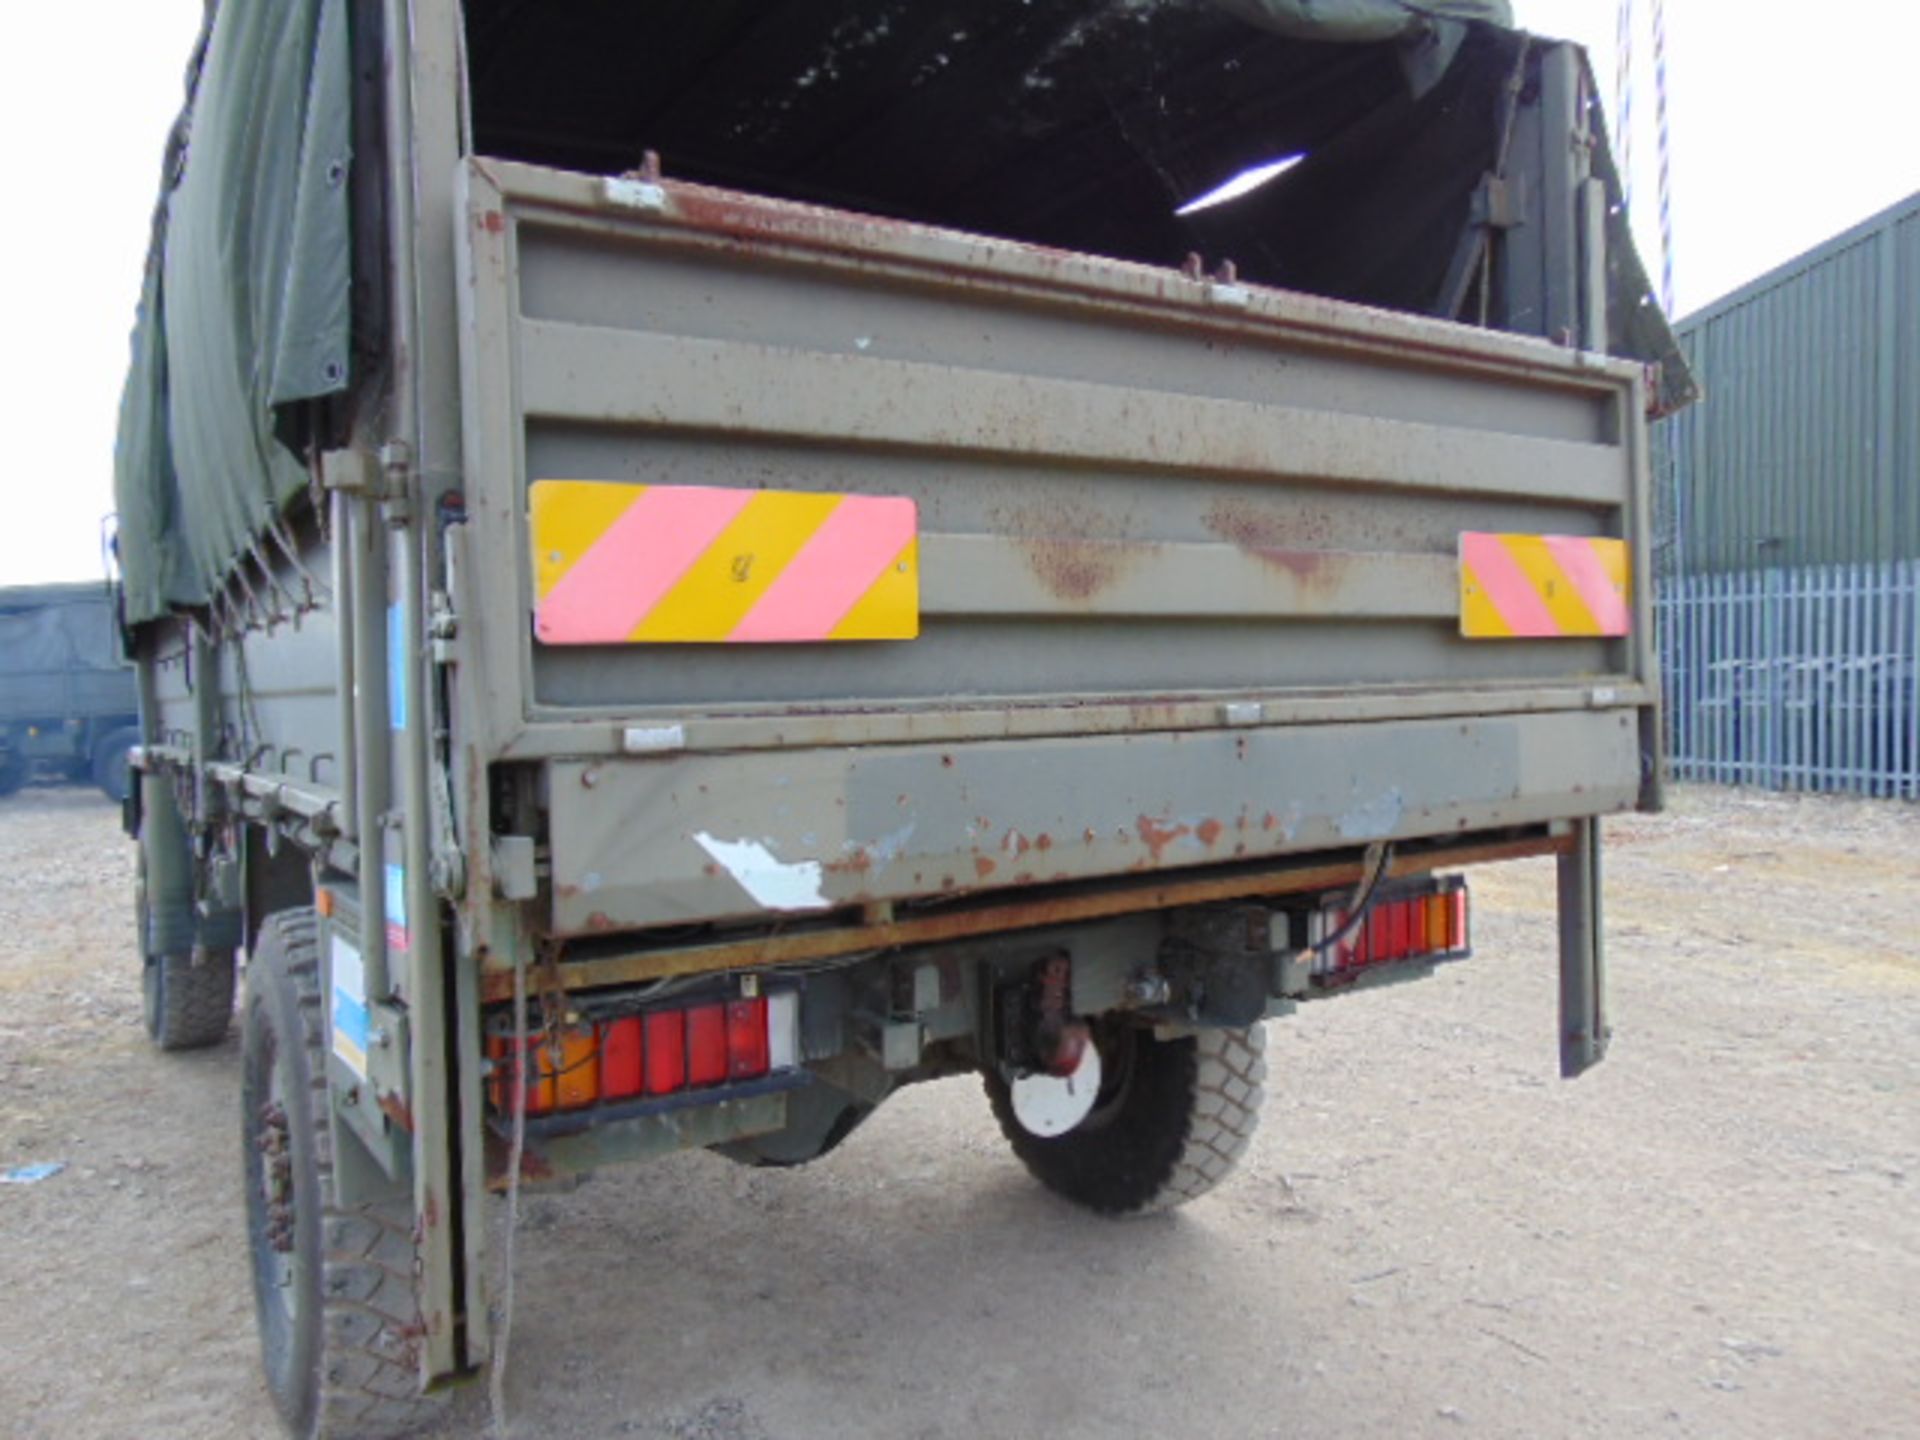 Left Hand Drive Leyland Daf 45/150 4 x 4 with Ratcliff 1000Kg Tail Lift - Image 9 of 15